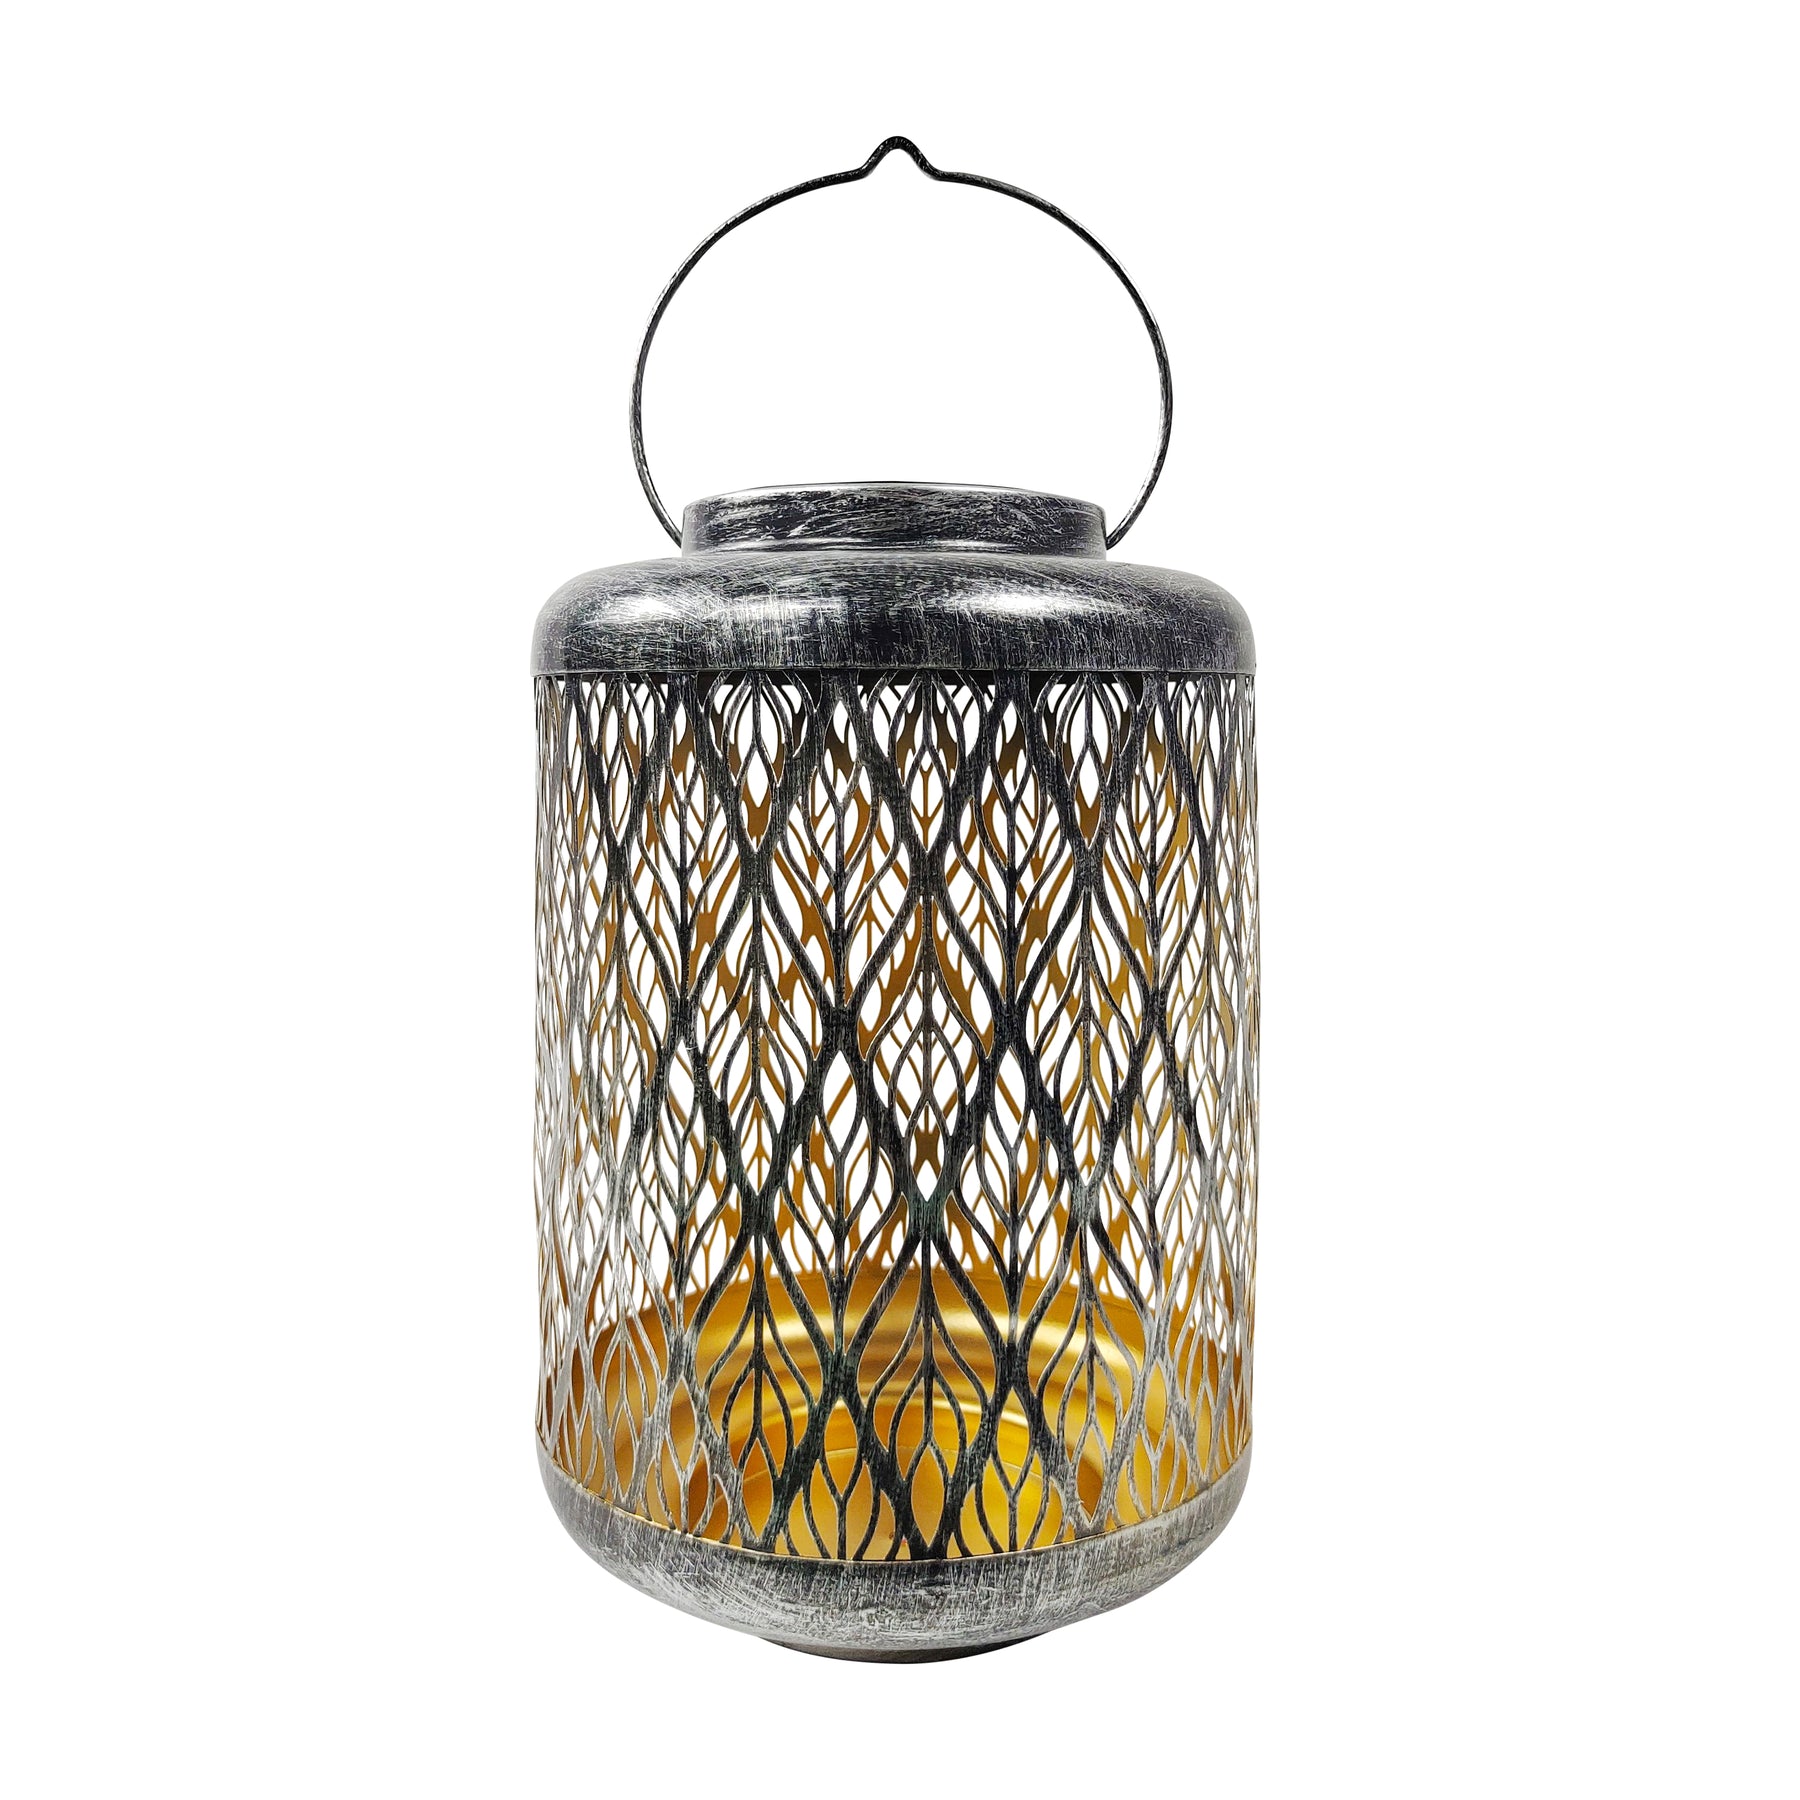 Bliss Outdoors 12-inch Tall Hanging and Tabletop Decorative Solar LED Lantern with Unique Diamond Leaf Design and Antique Hand Painted Finish in the brushed silver variation.